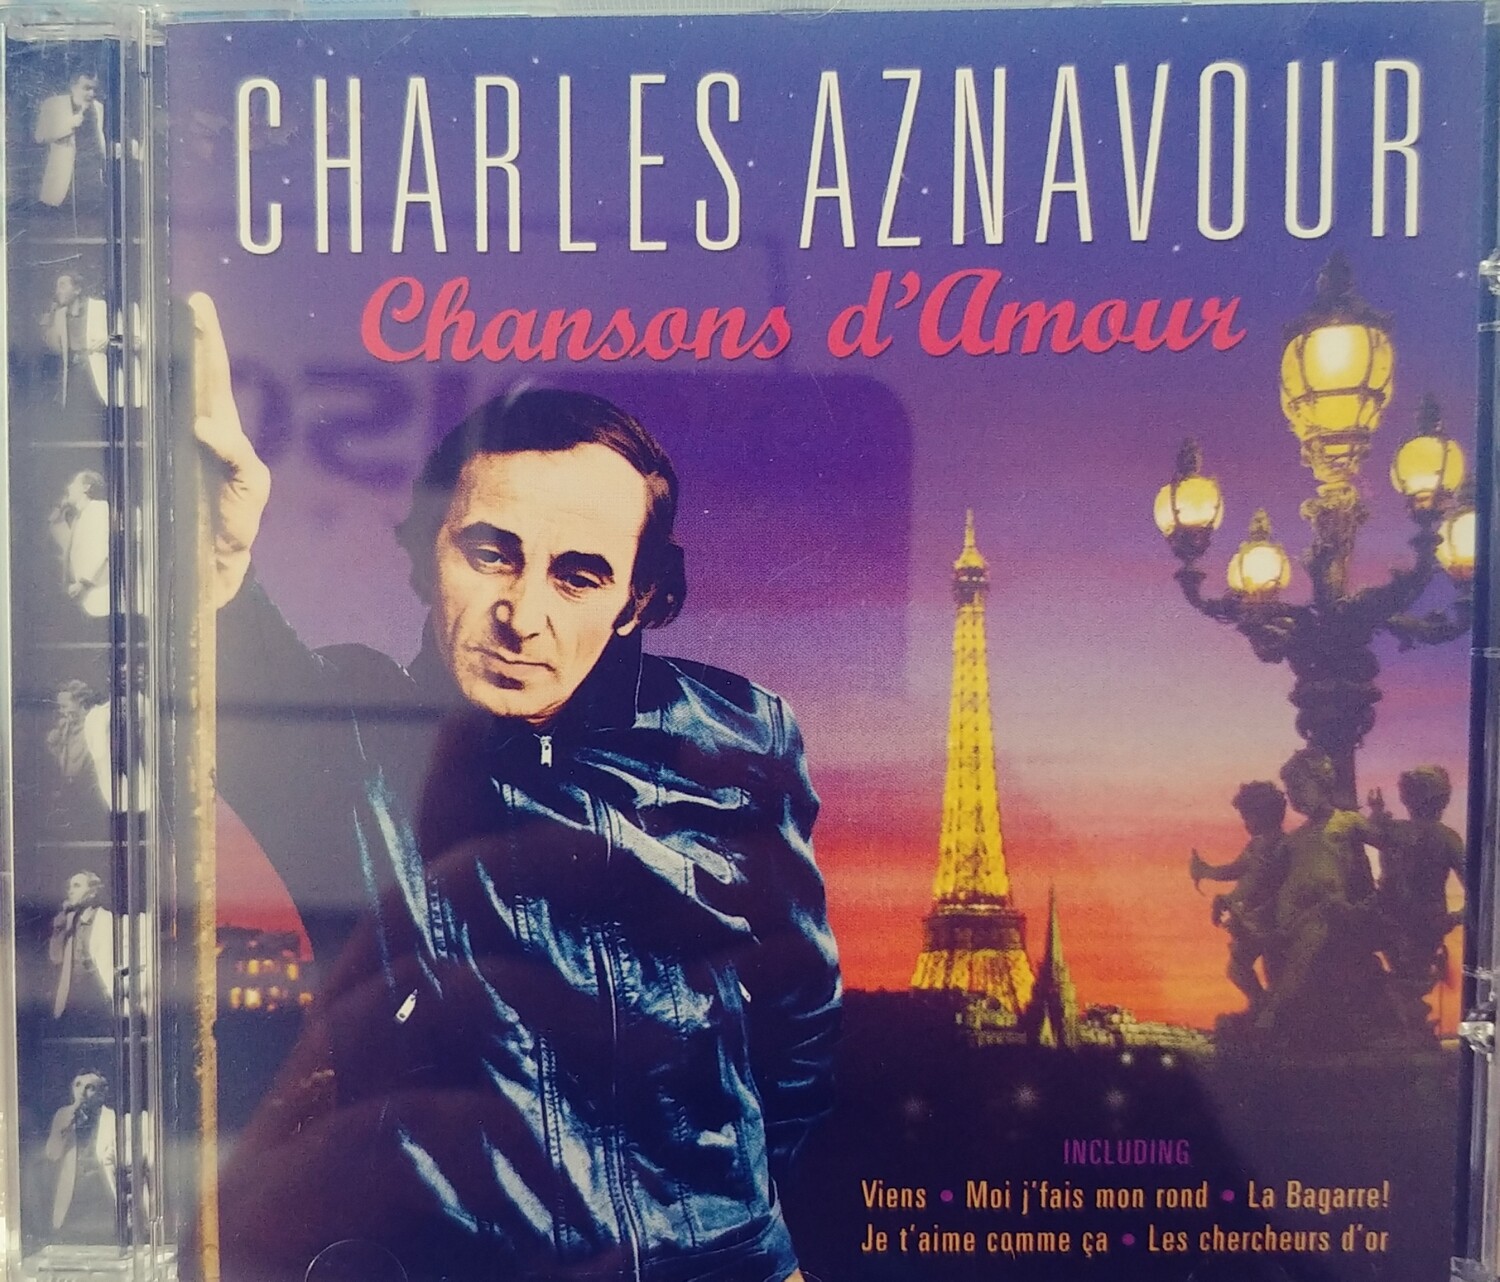 Charles Aznavour - Chansons d'amour (CD)